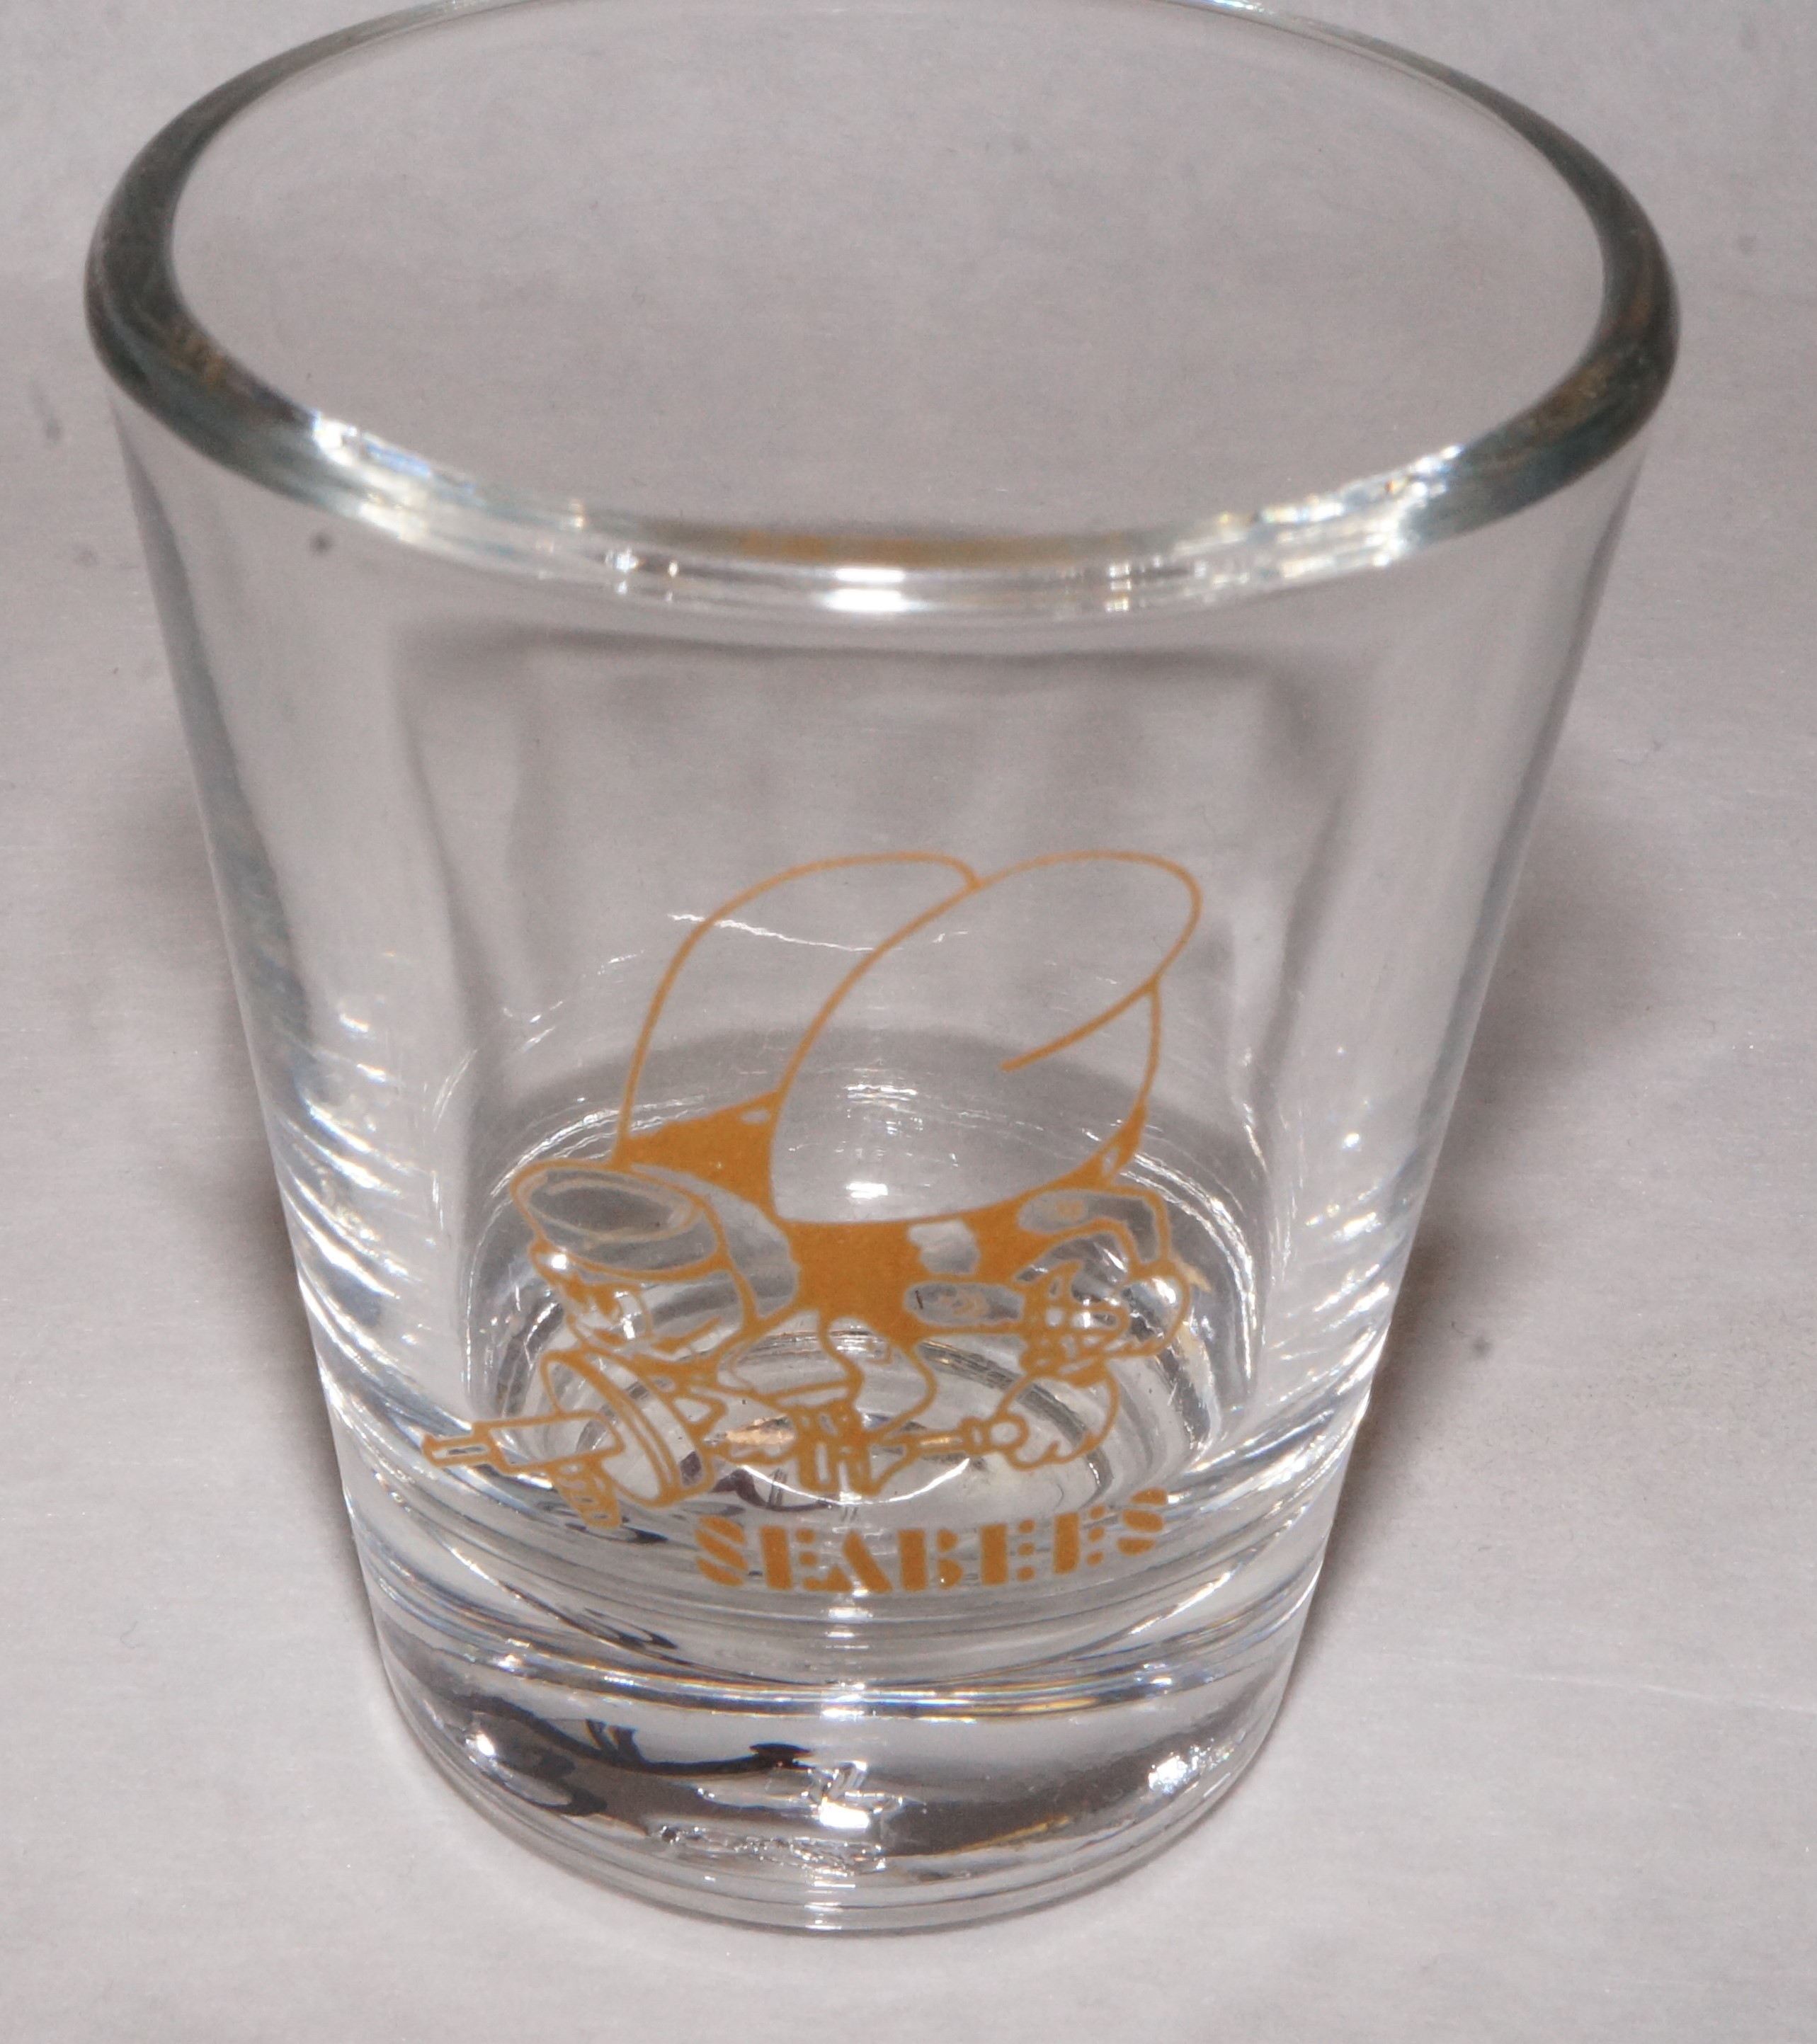 Shot Glass- Seabees Clear glass 2oz